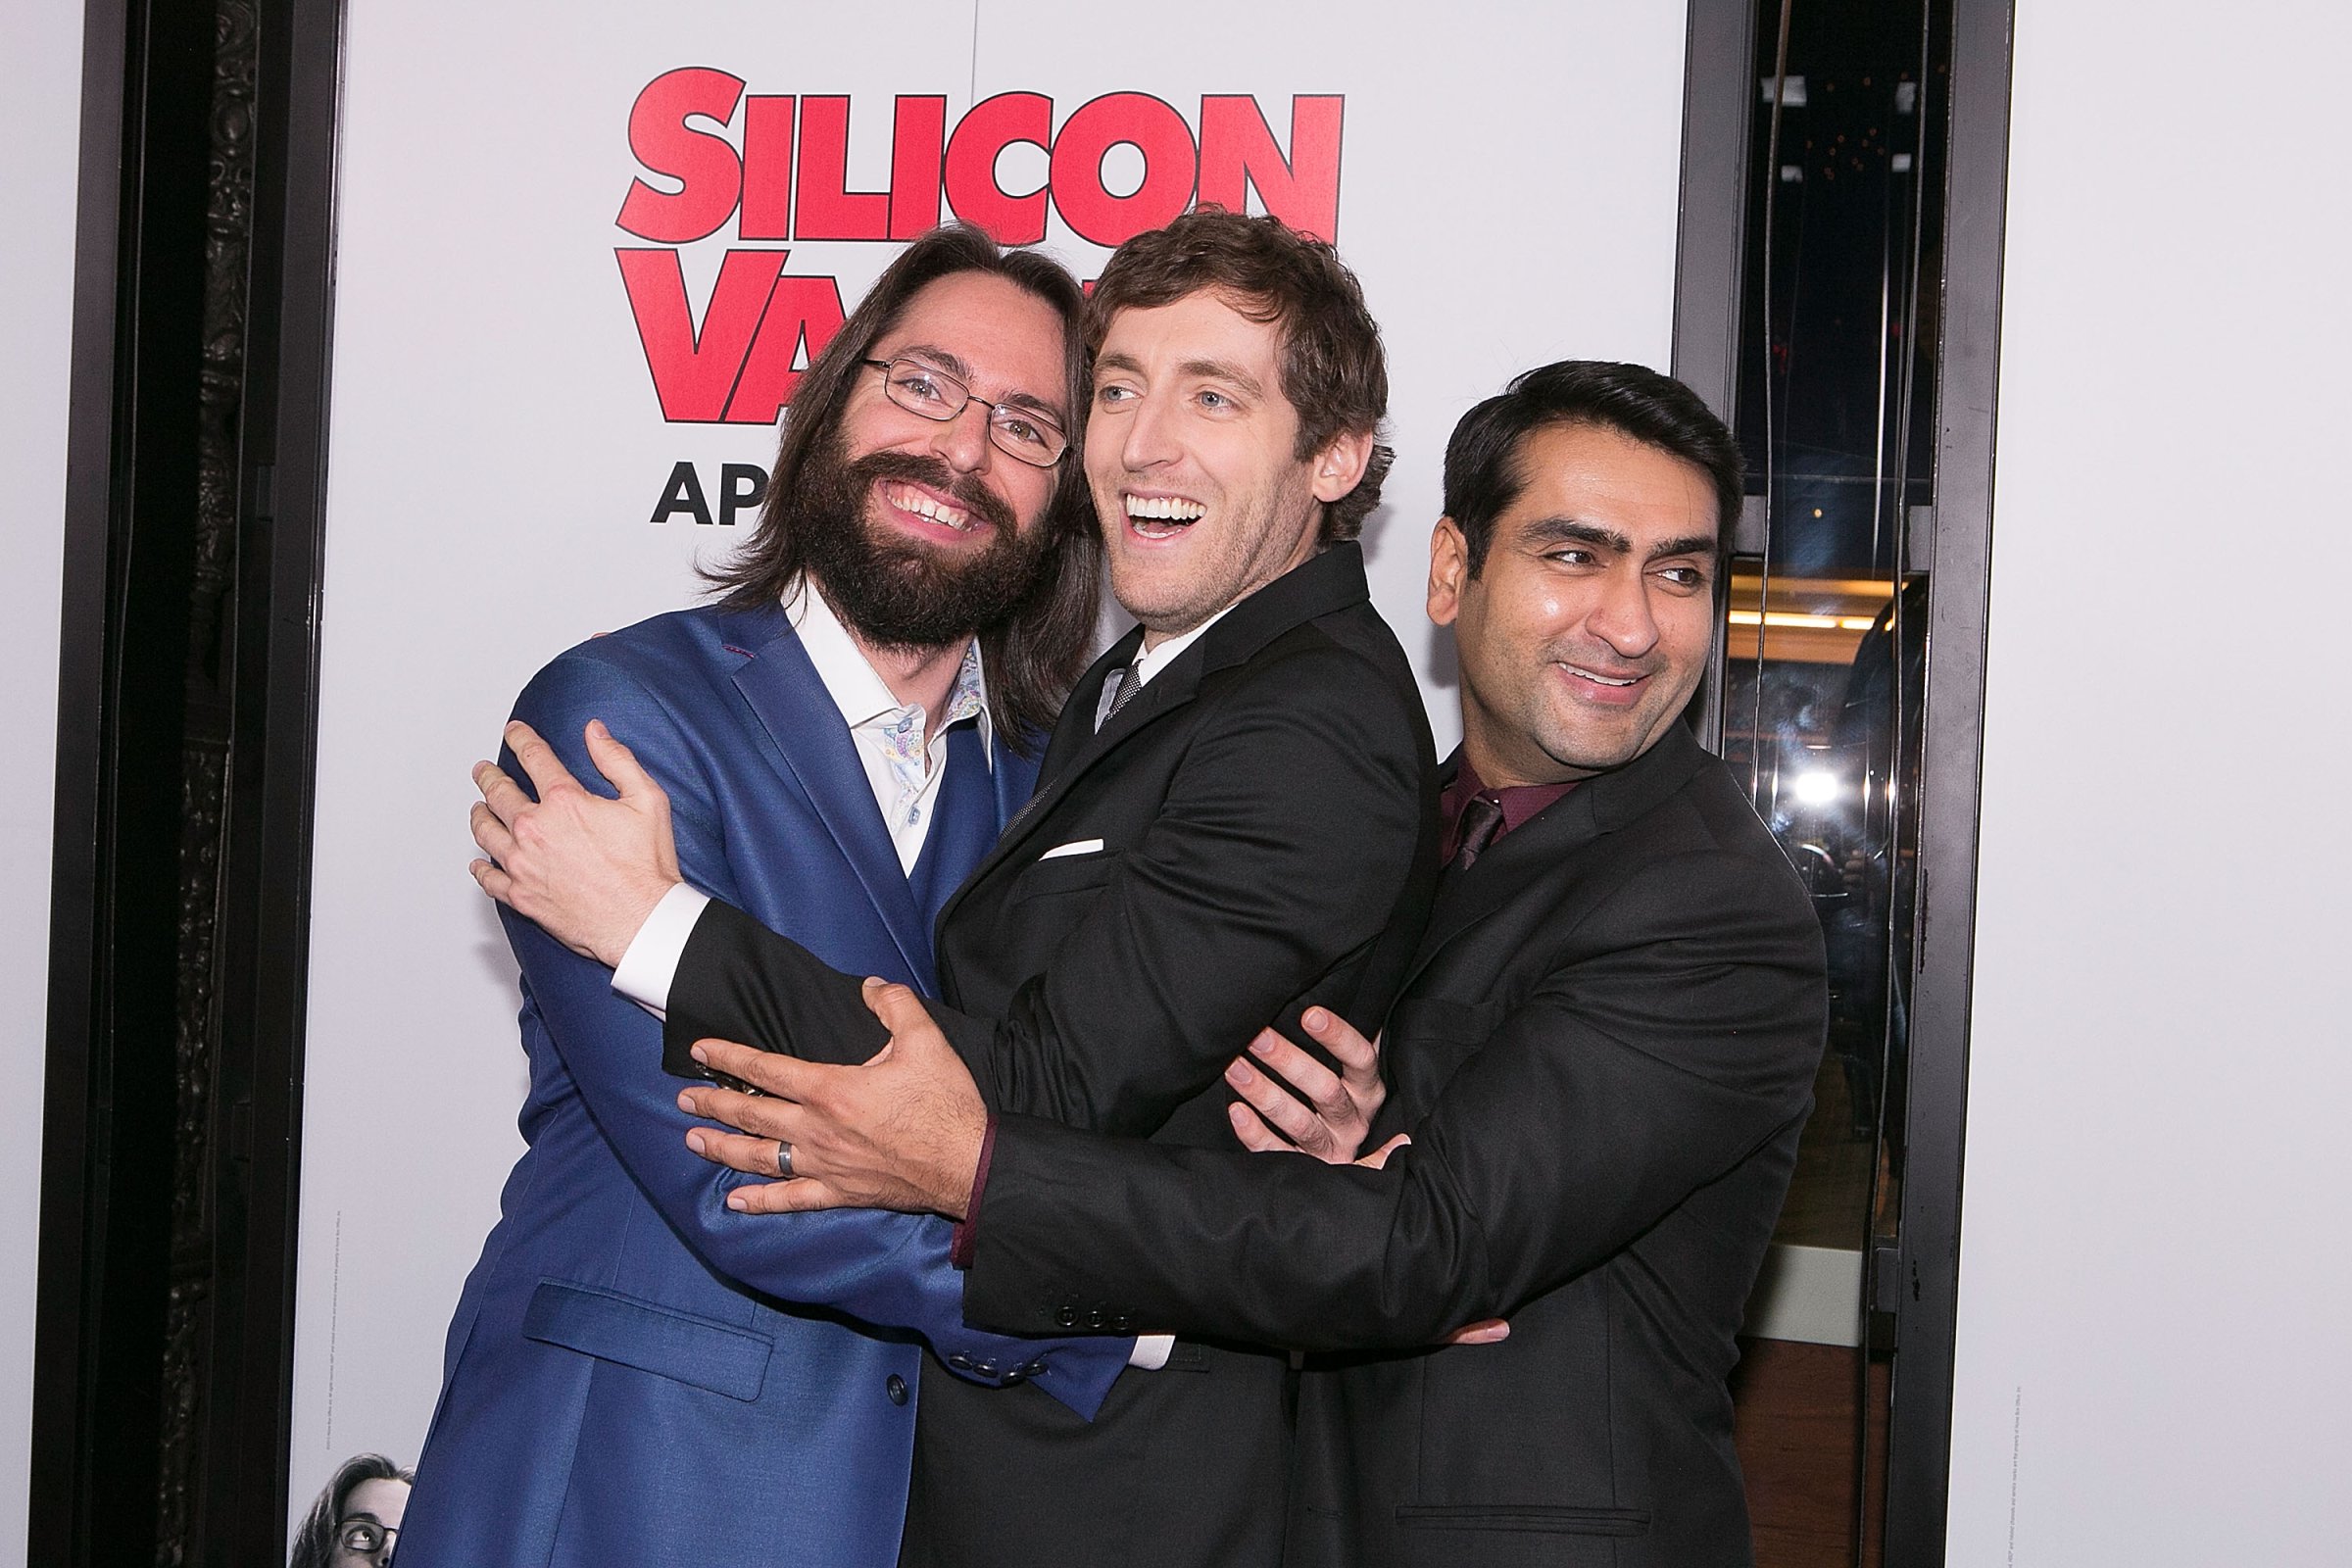 Premiere Of HBO's "Silicon Valley" 2nd Season - Arrivals